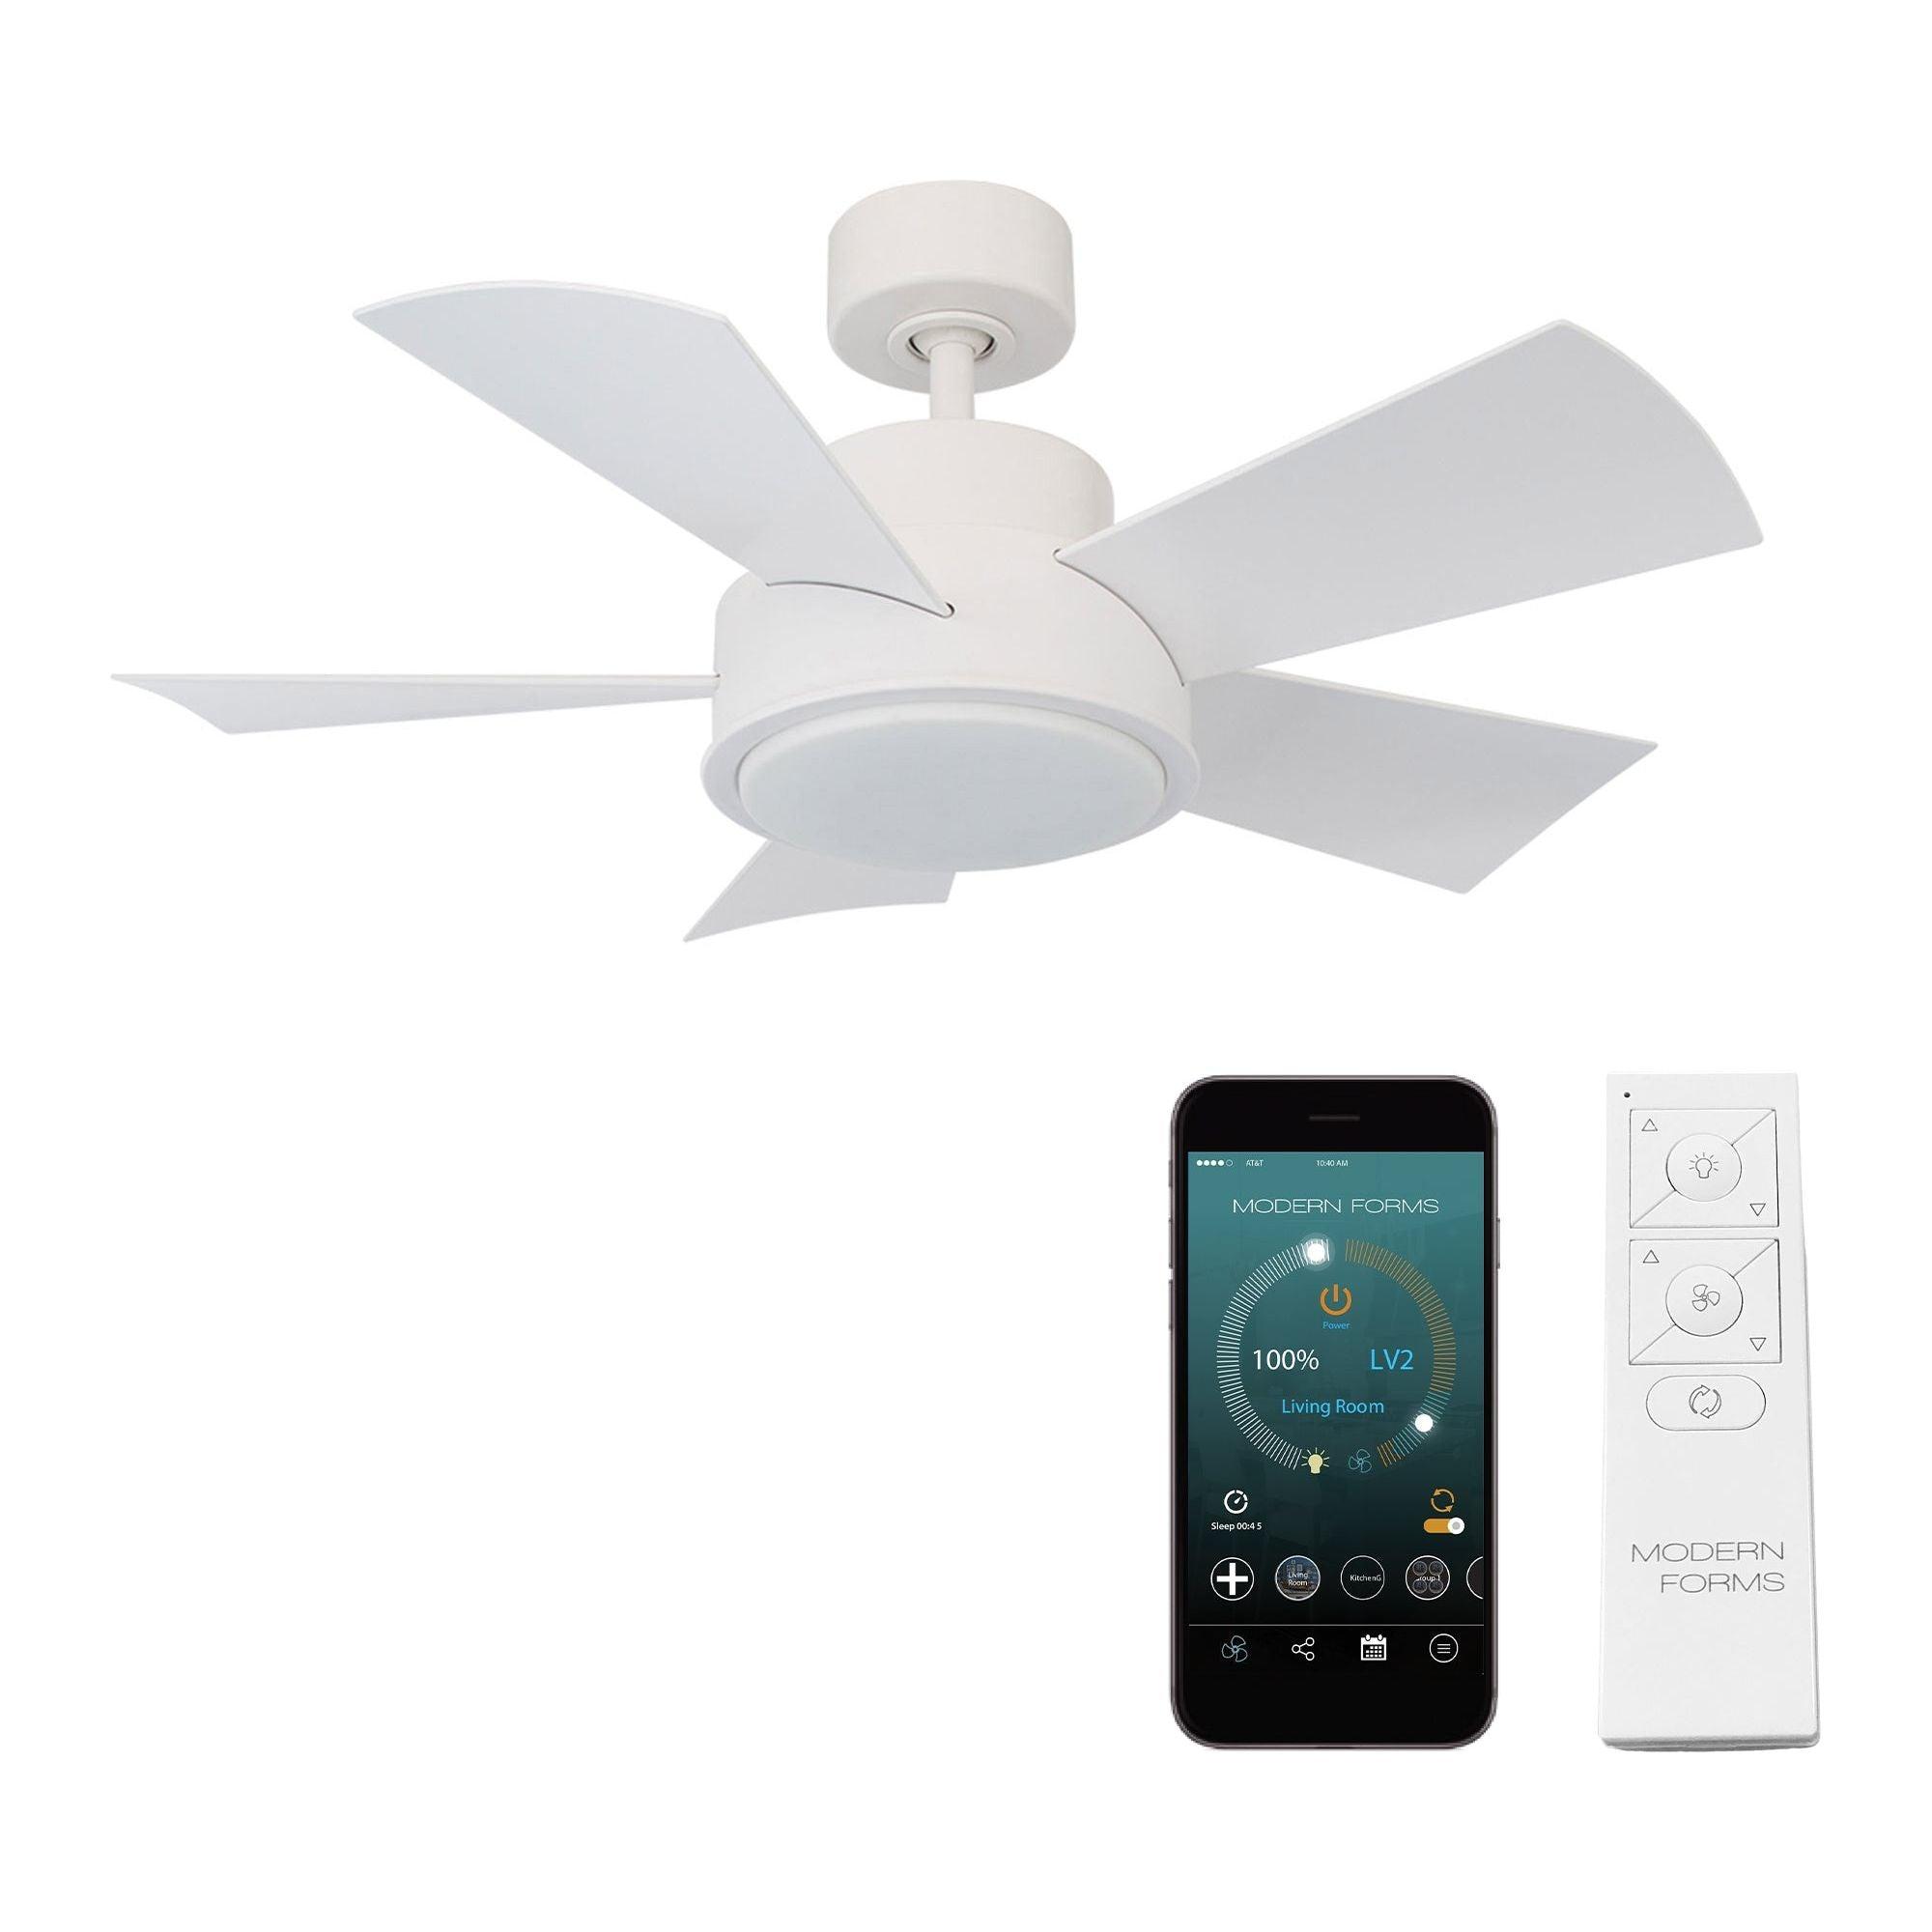 Modern Forms - Vox Indoor/Outdoor 5-Blade 38" Smart Ceiling Fan with LED Light Kit and Remote Control - Lights Canada